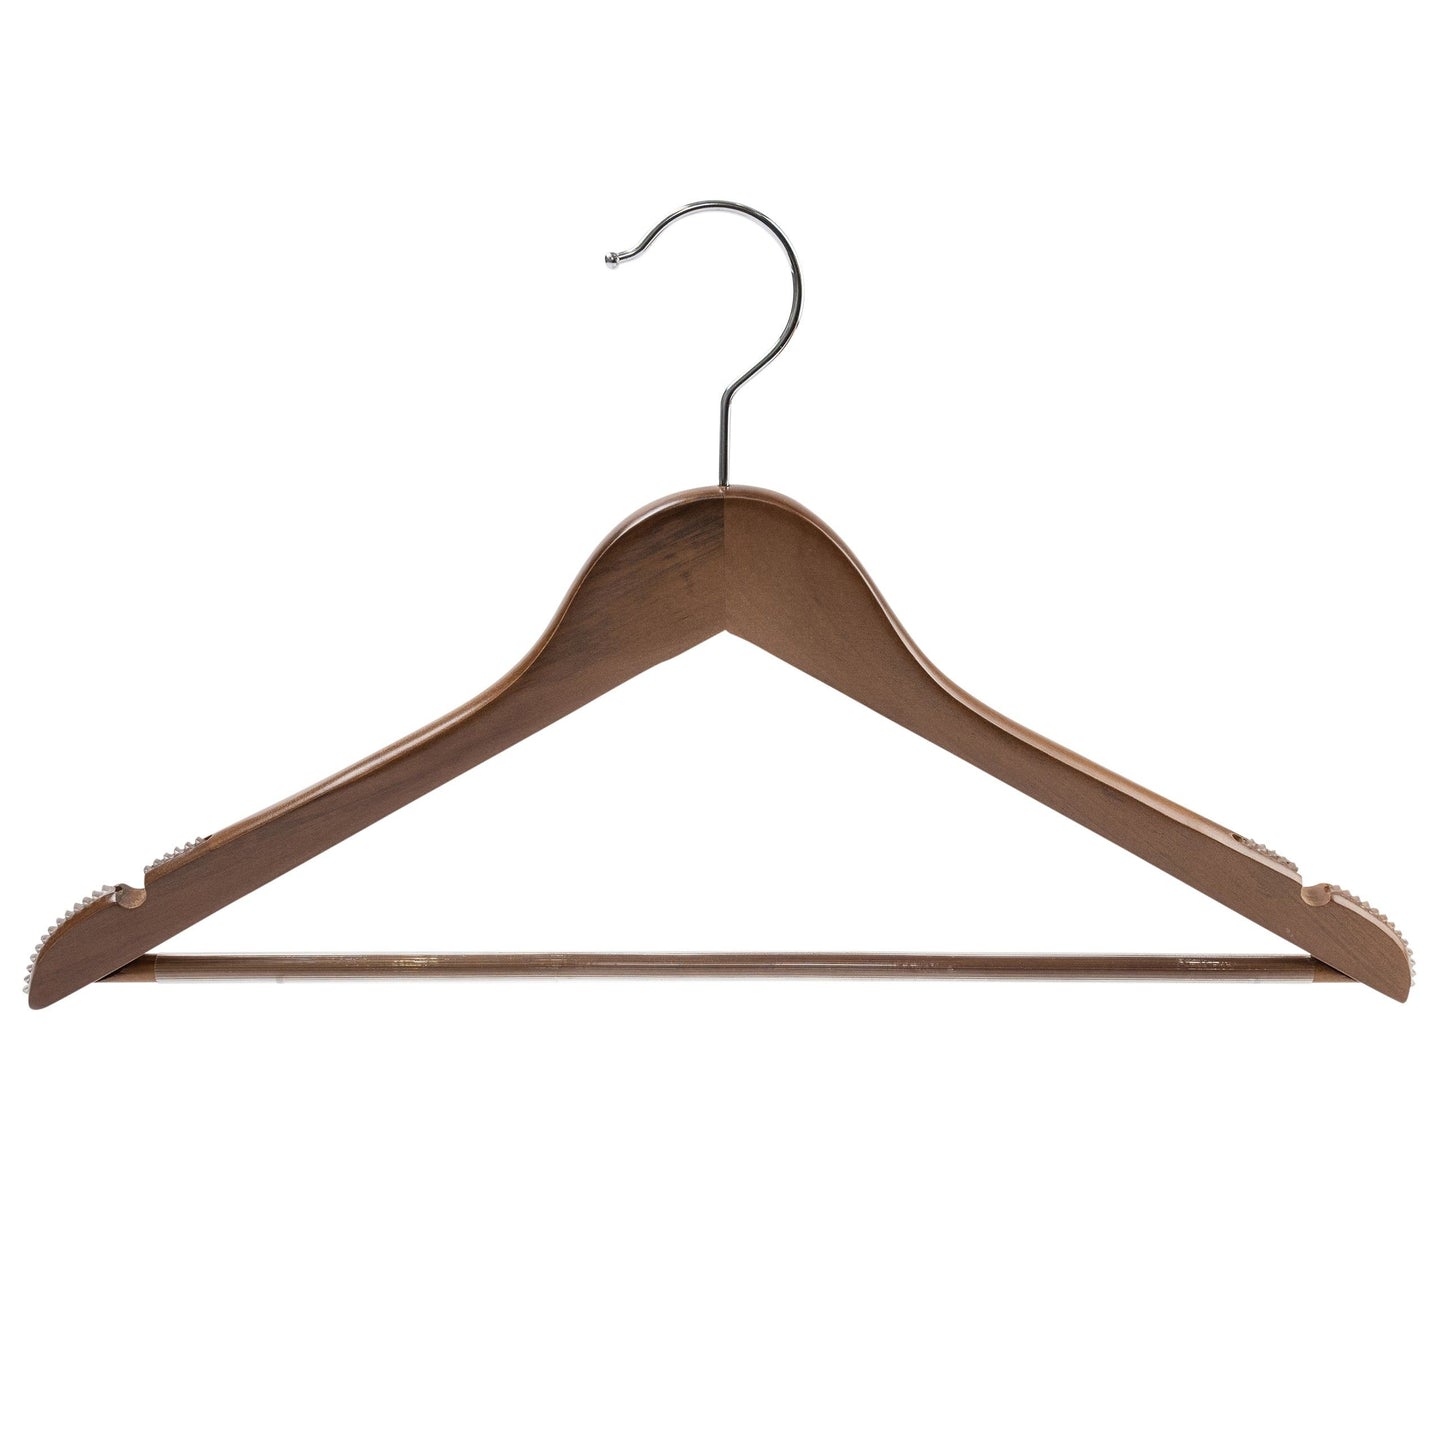 Walnut Wood Suit Hanger With Curved Body Soft Rubber installed on Shoulders & Pant Bar - 44.5cm X 14mm Thick (Sold in 25/50/100)